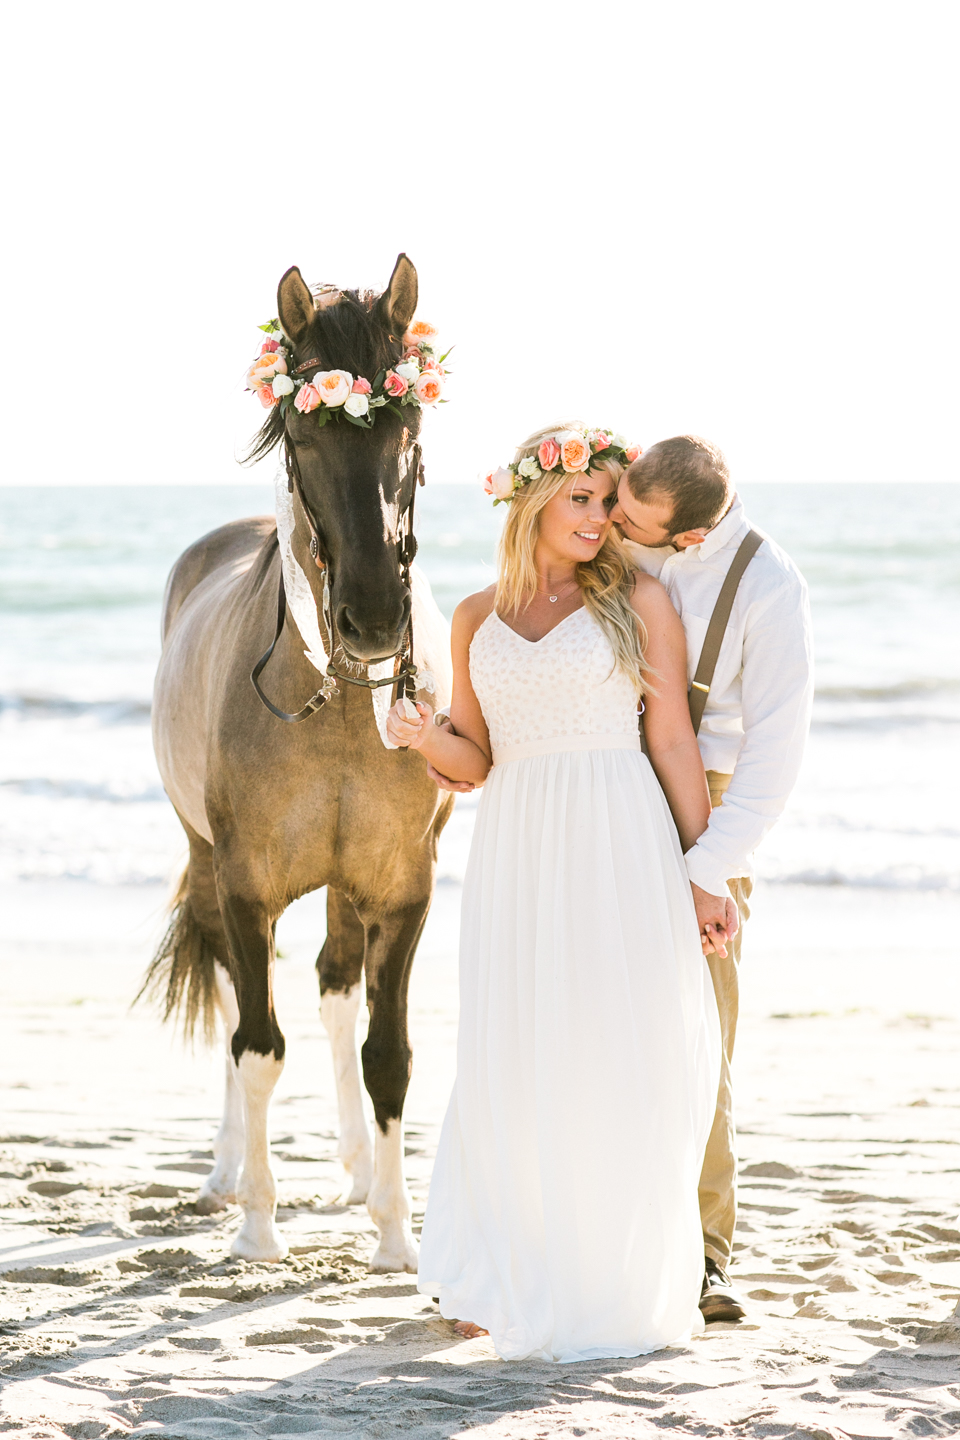 bohemian rustic beach horse engagement session, beach engagement session, engagement session with a horse, flower crown, sexy engagement session, lace tent, guitar, flower crown on horse, trash the dress, horse and bride running in water, austin and ryan, engaged and inspired, holman ranch, beautiful couple, modcloth dress, bride walking her horse, moss landings, zmudowski Beach, monterey beach, bohemian wedding, jasmine lee photography